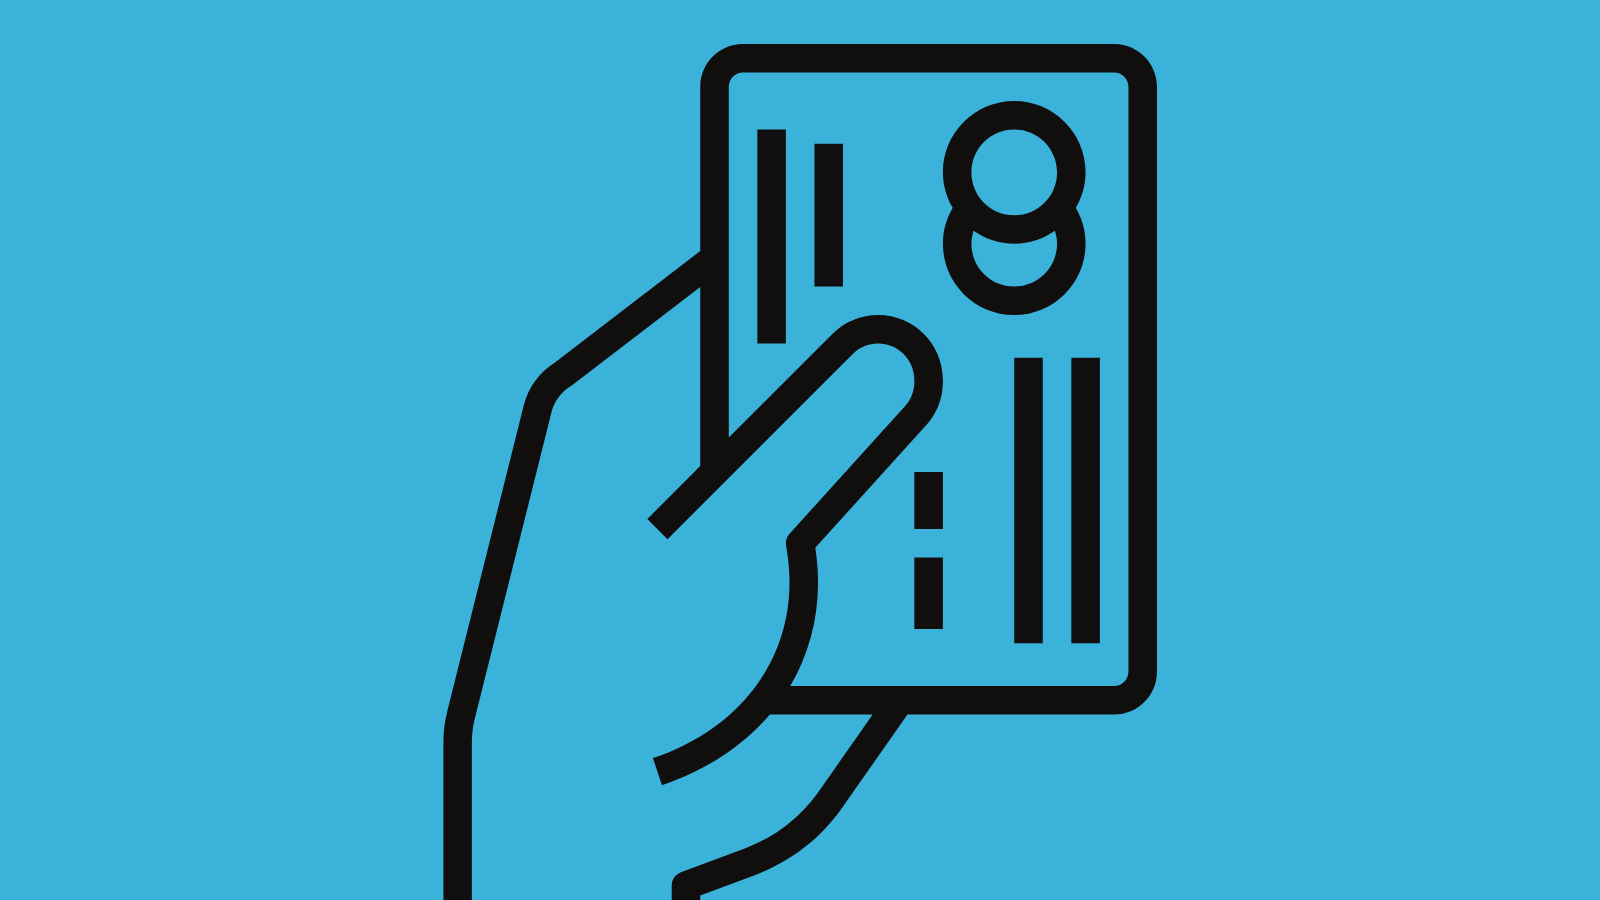 A minimalist illustration of a hand holding out a credit card